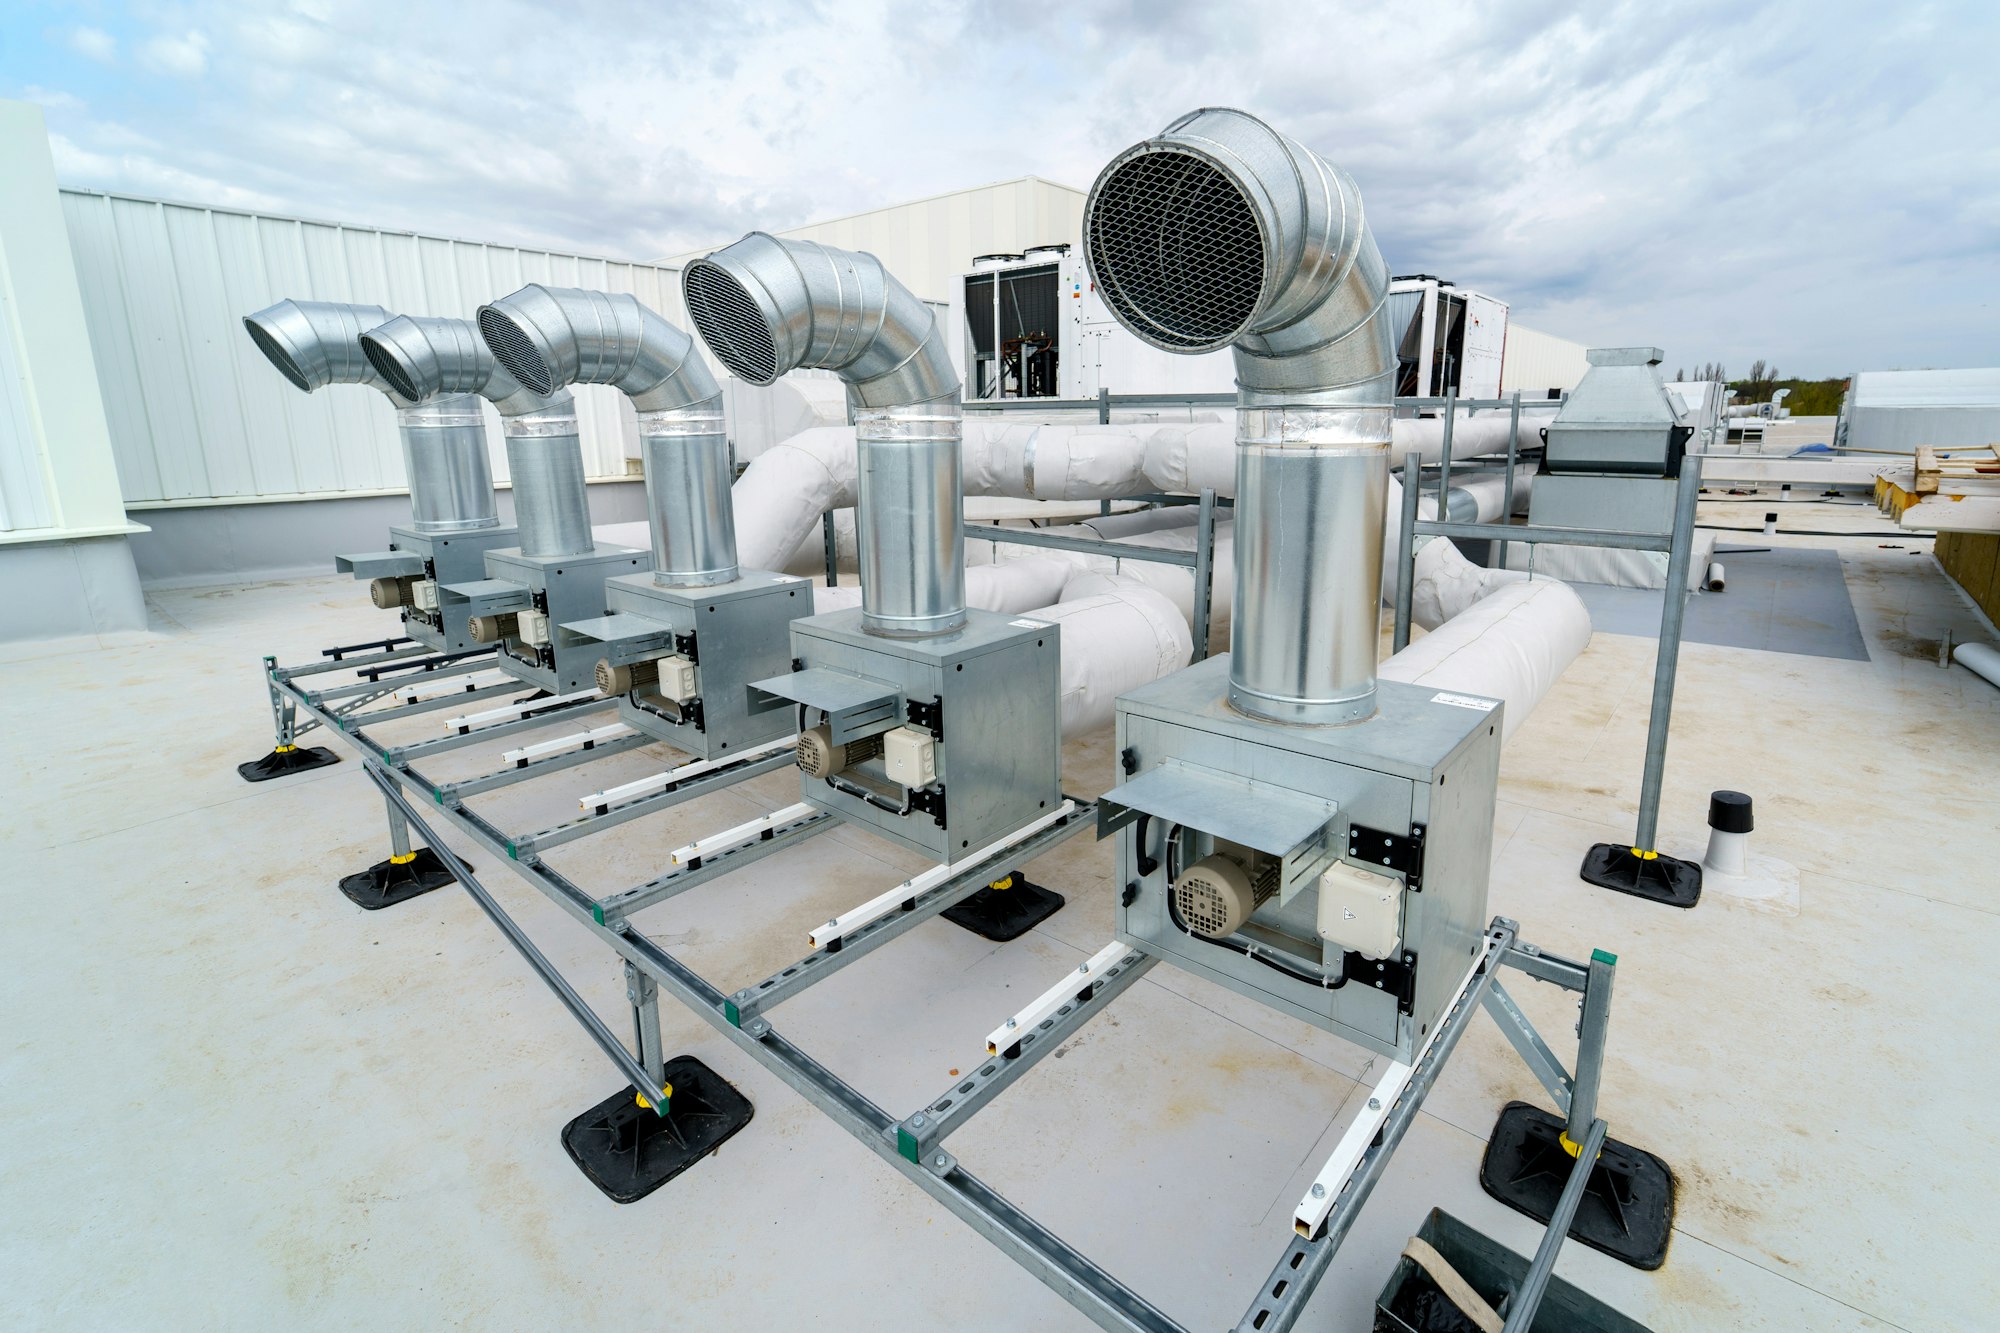 The air conditioning and ventilation system